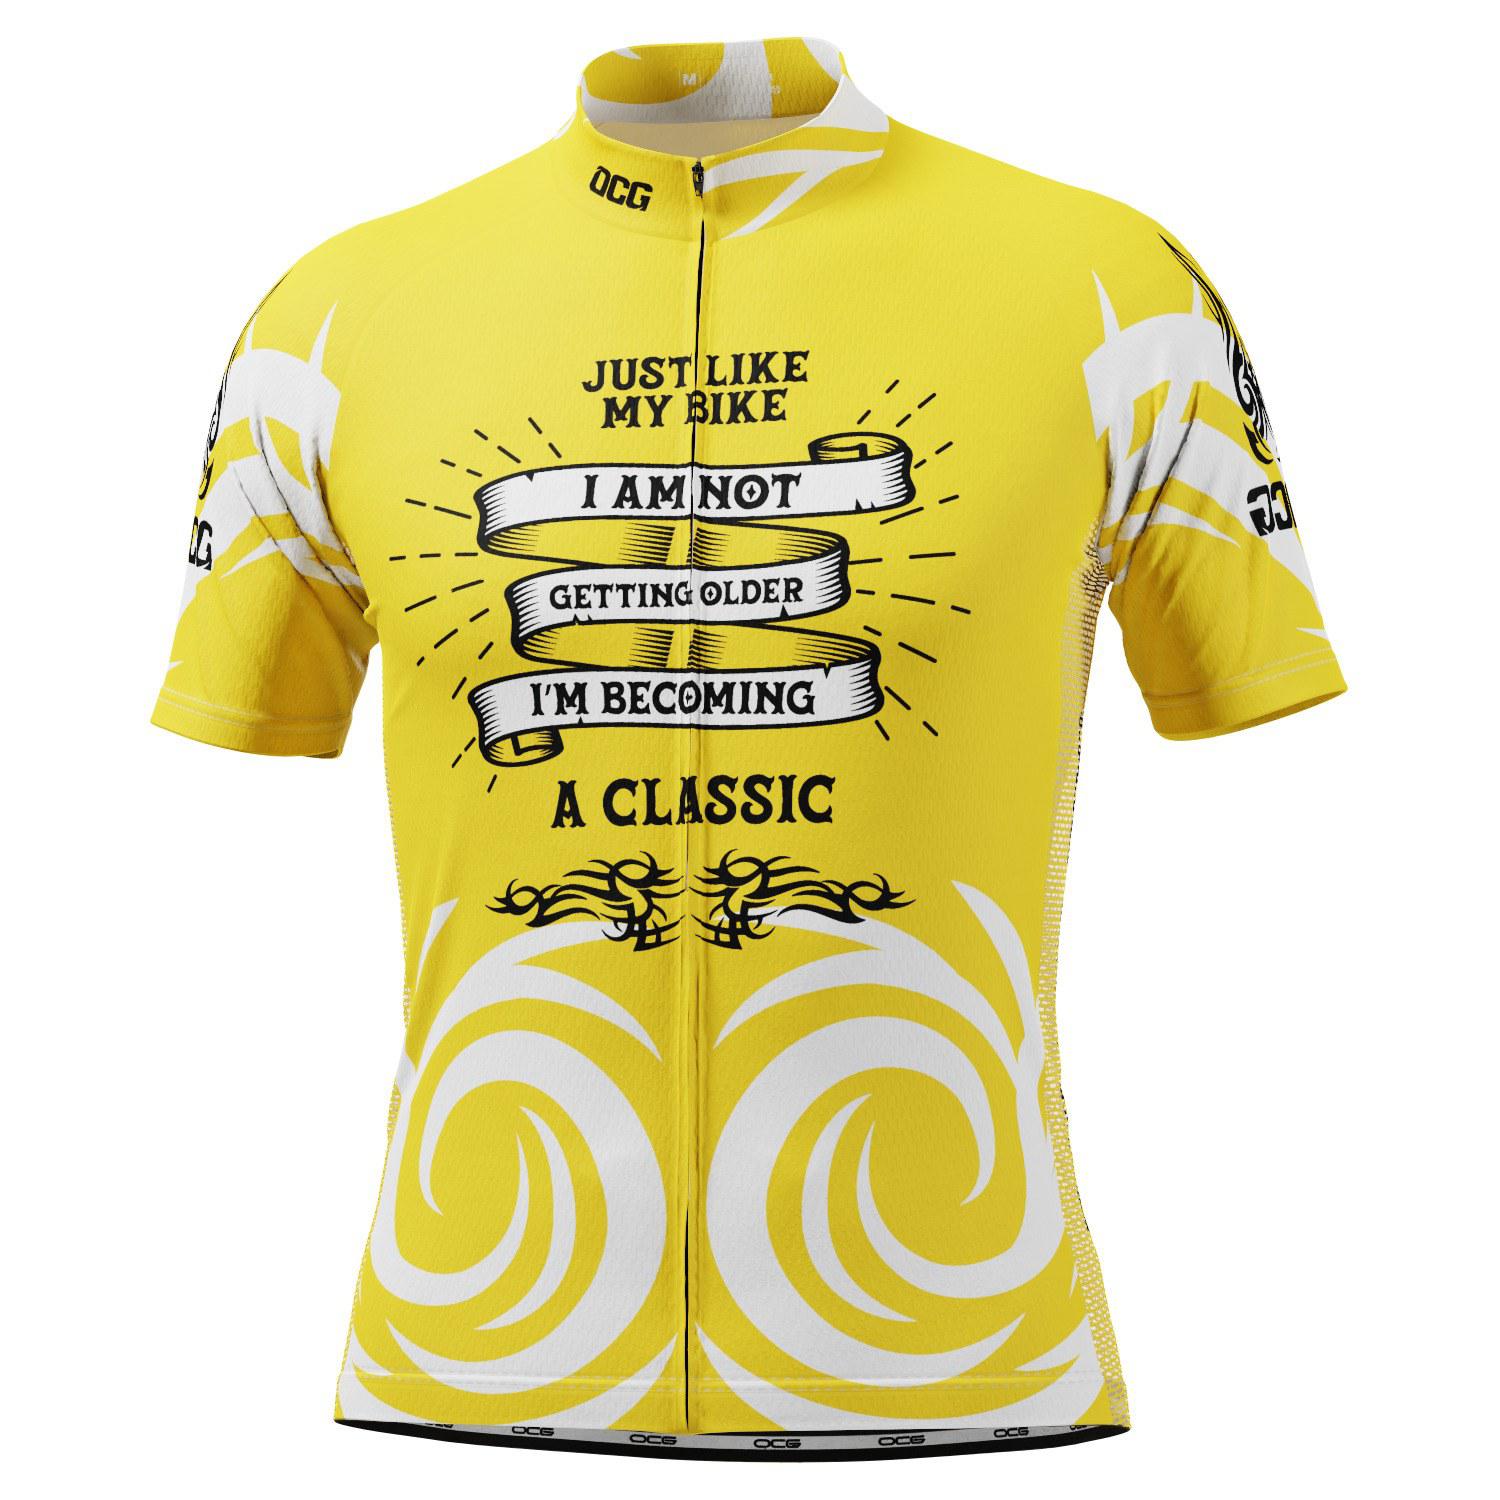 Men's Becoming Classic Short Sleeve Cycling Jersey